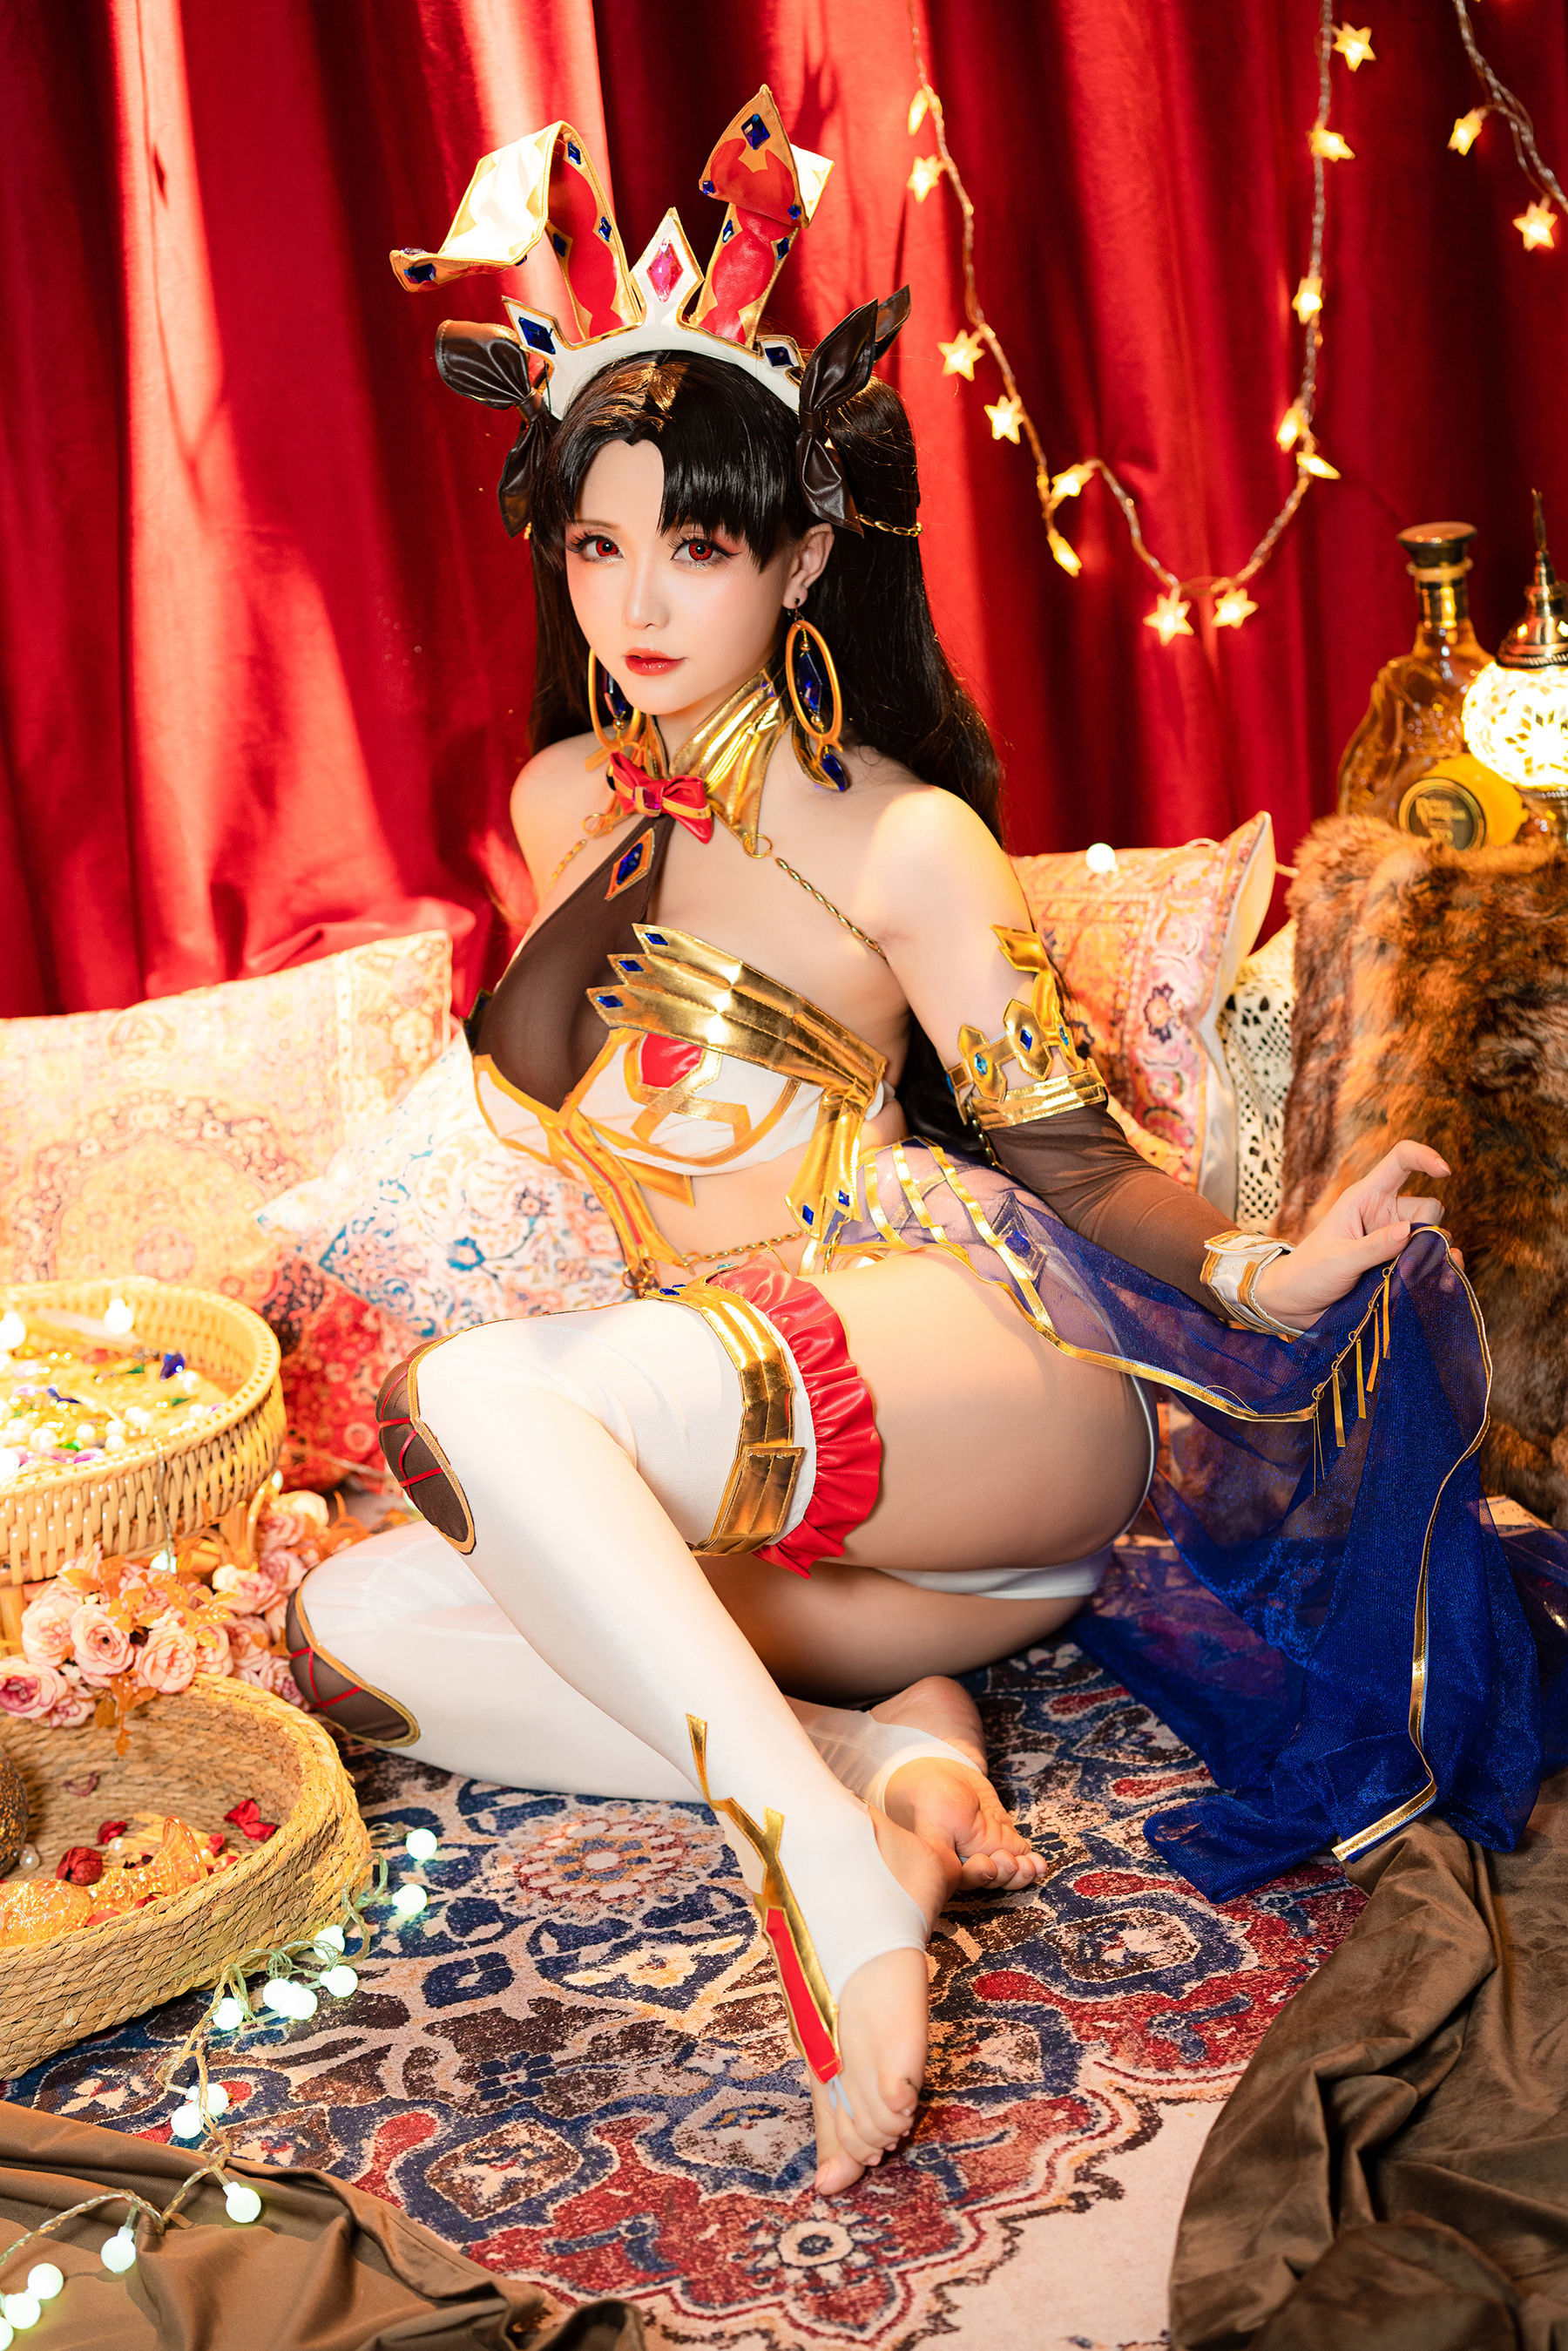 [Net Red COSER Photo] Miss Coser Star Chichi - Ishtar Colleague Istarin Page 21 No.d328d3